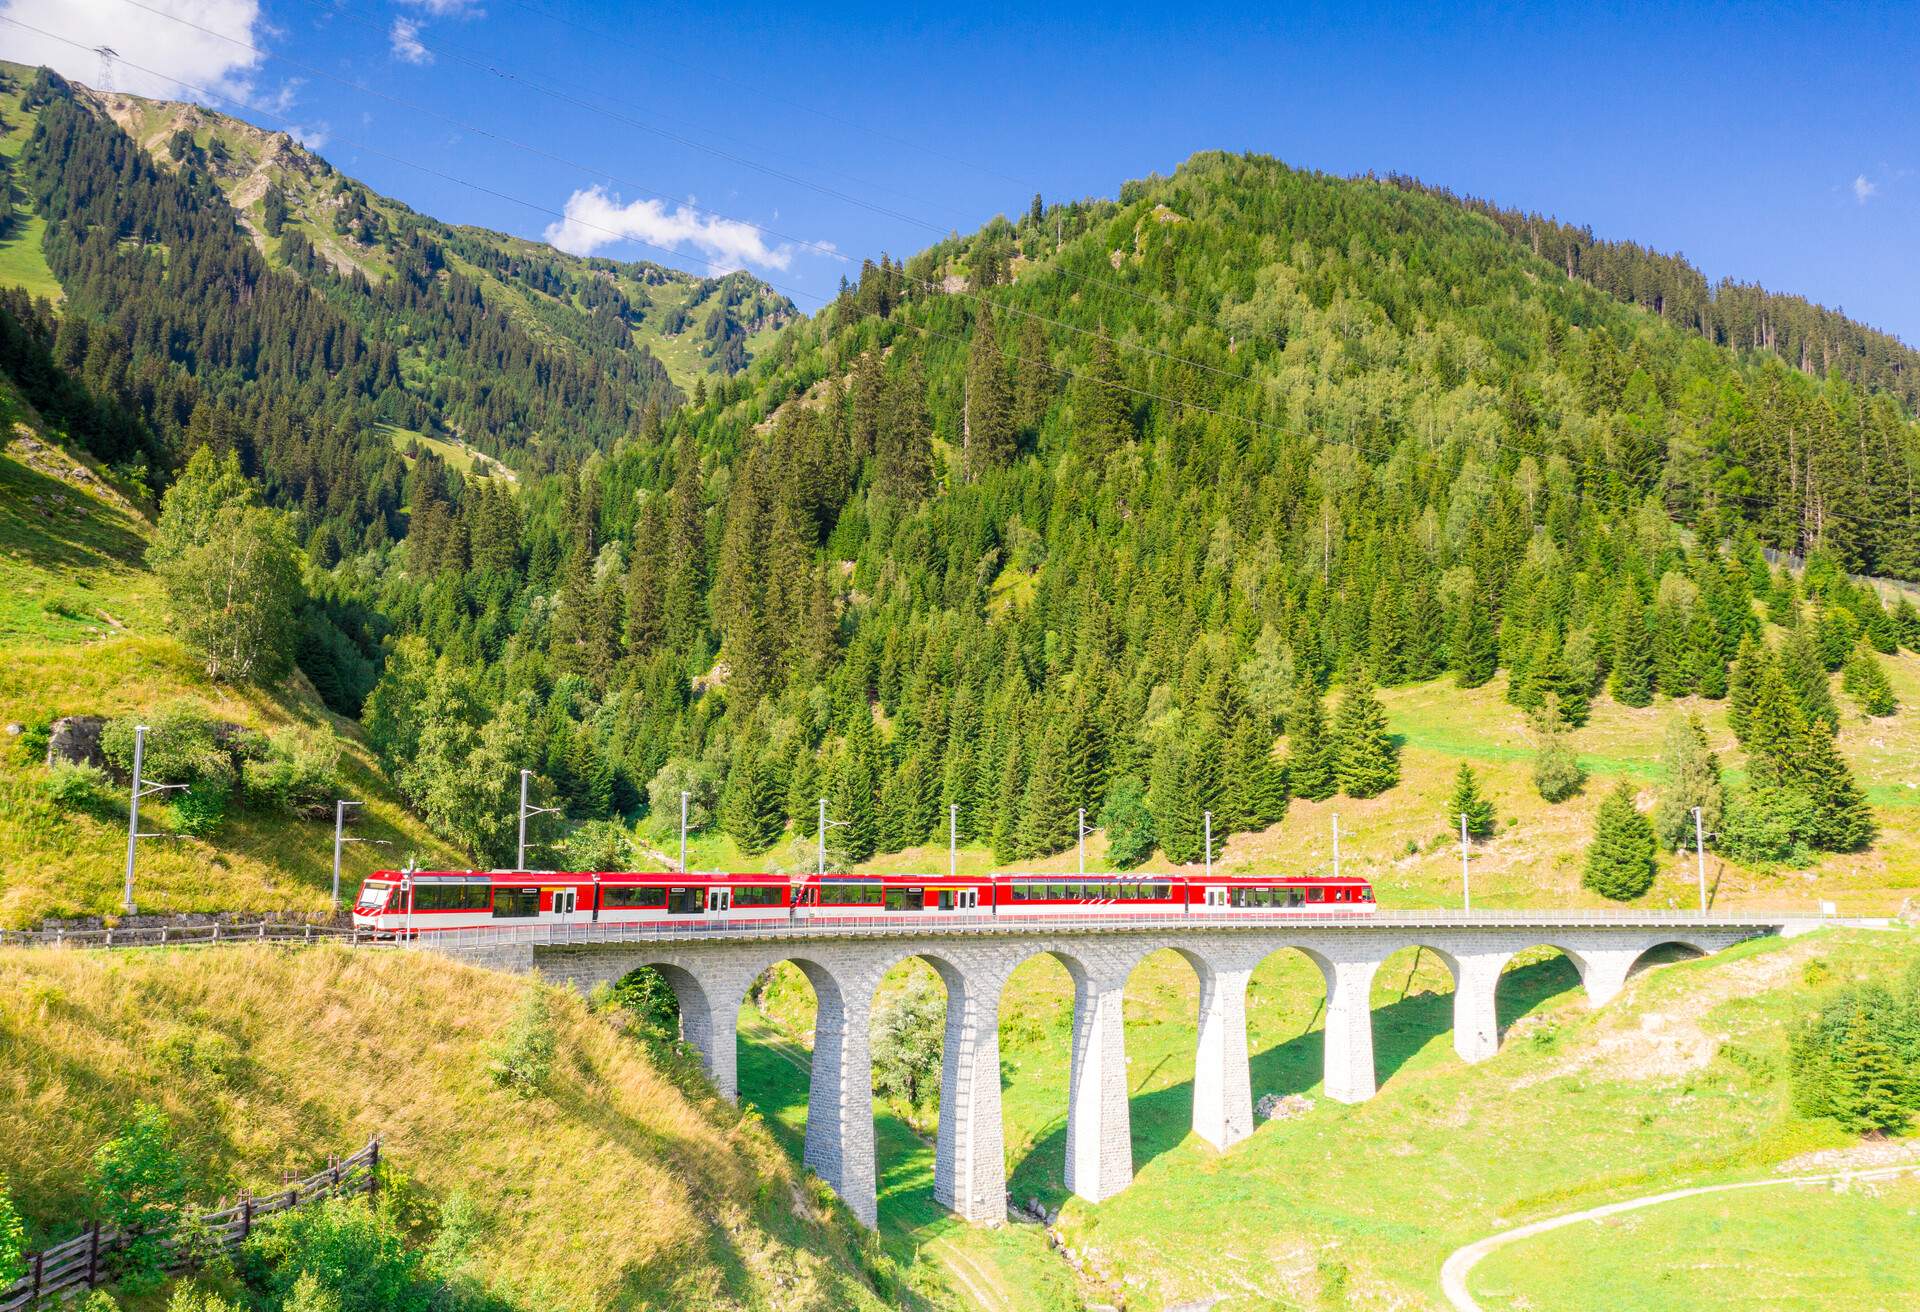 Summer sky on the Glacier Express train along Tujetsch viaduct surrounded by green woods in summer, Sedrun, Graubunden canton, Switzerland